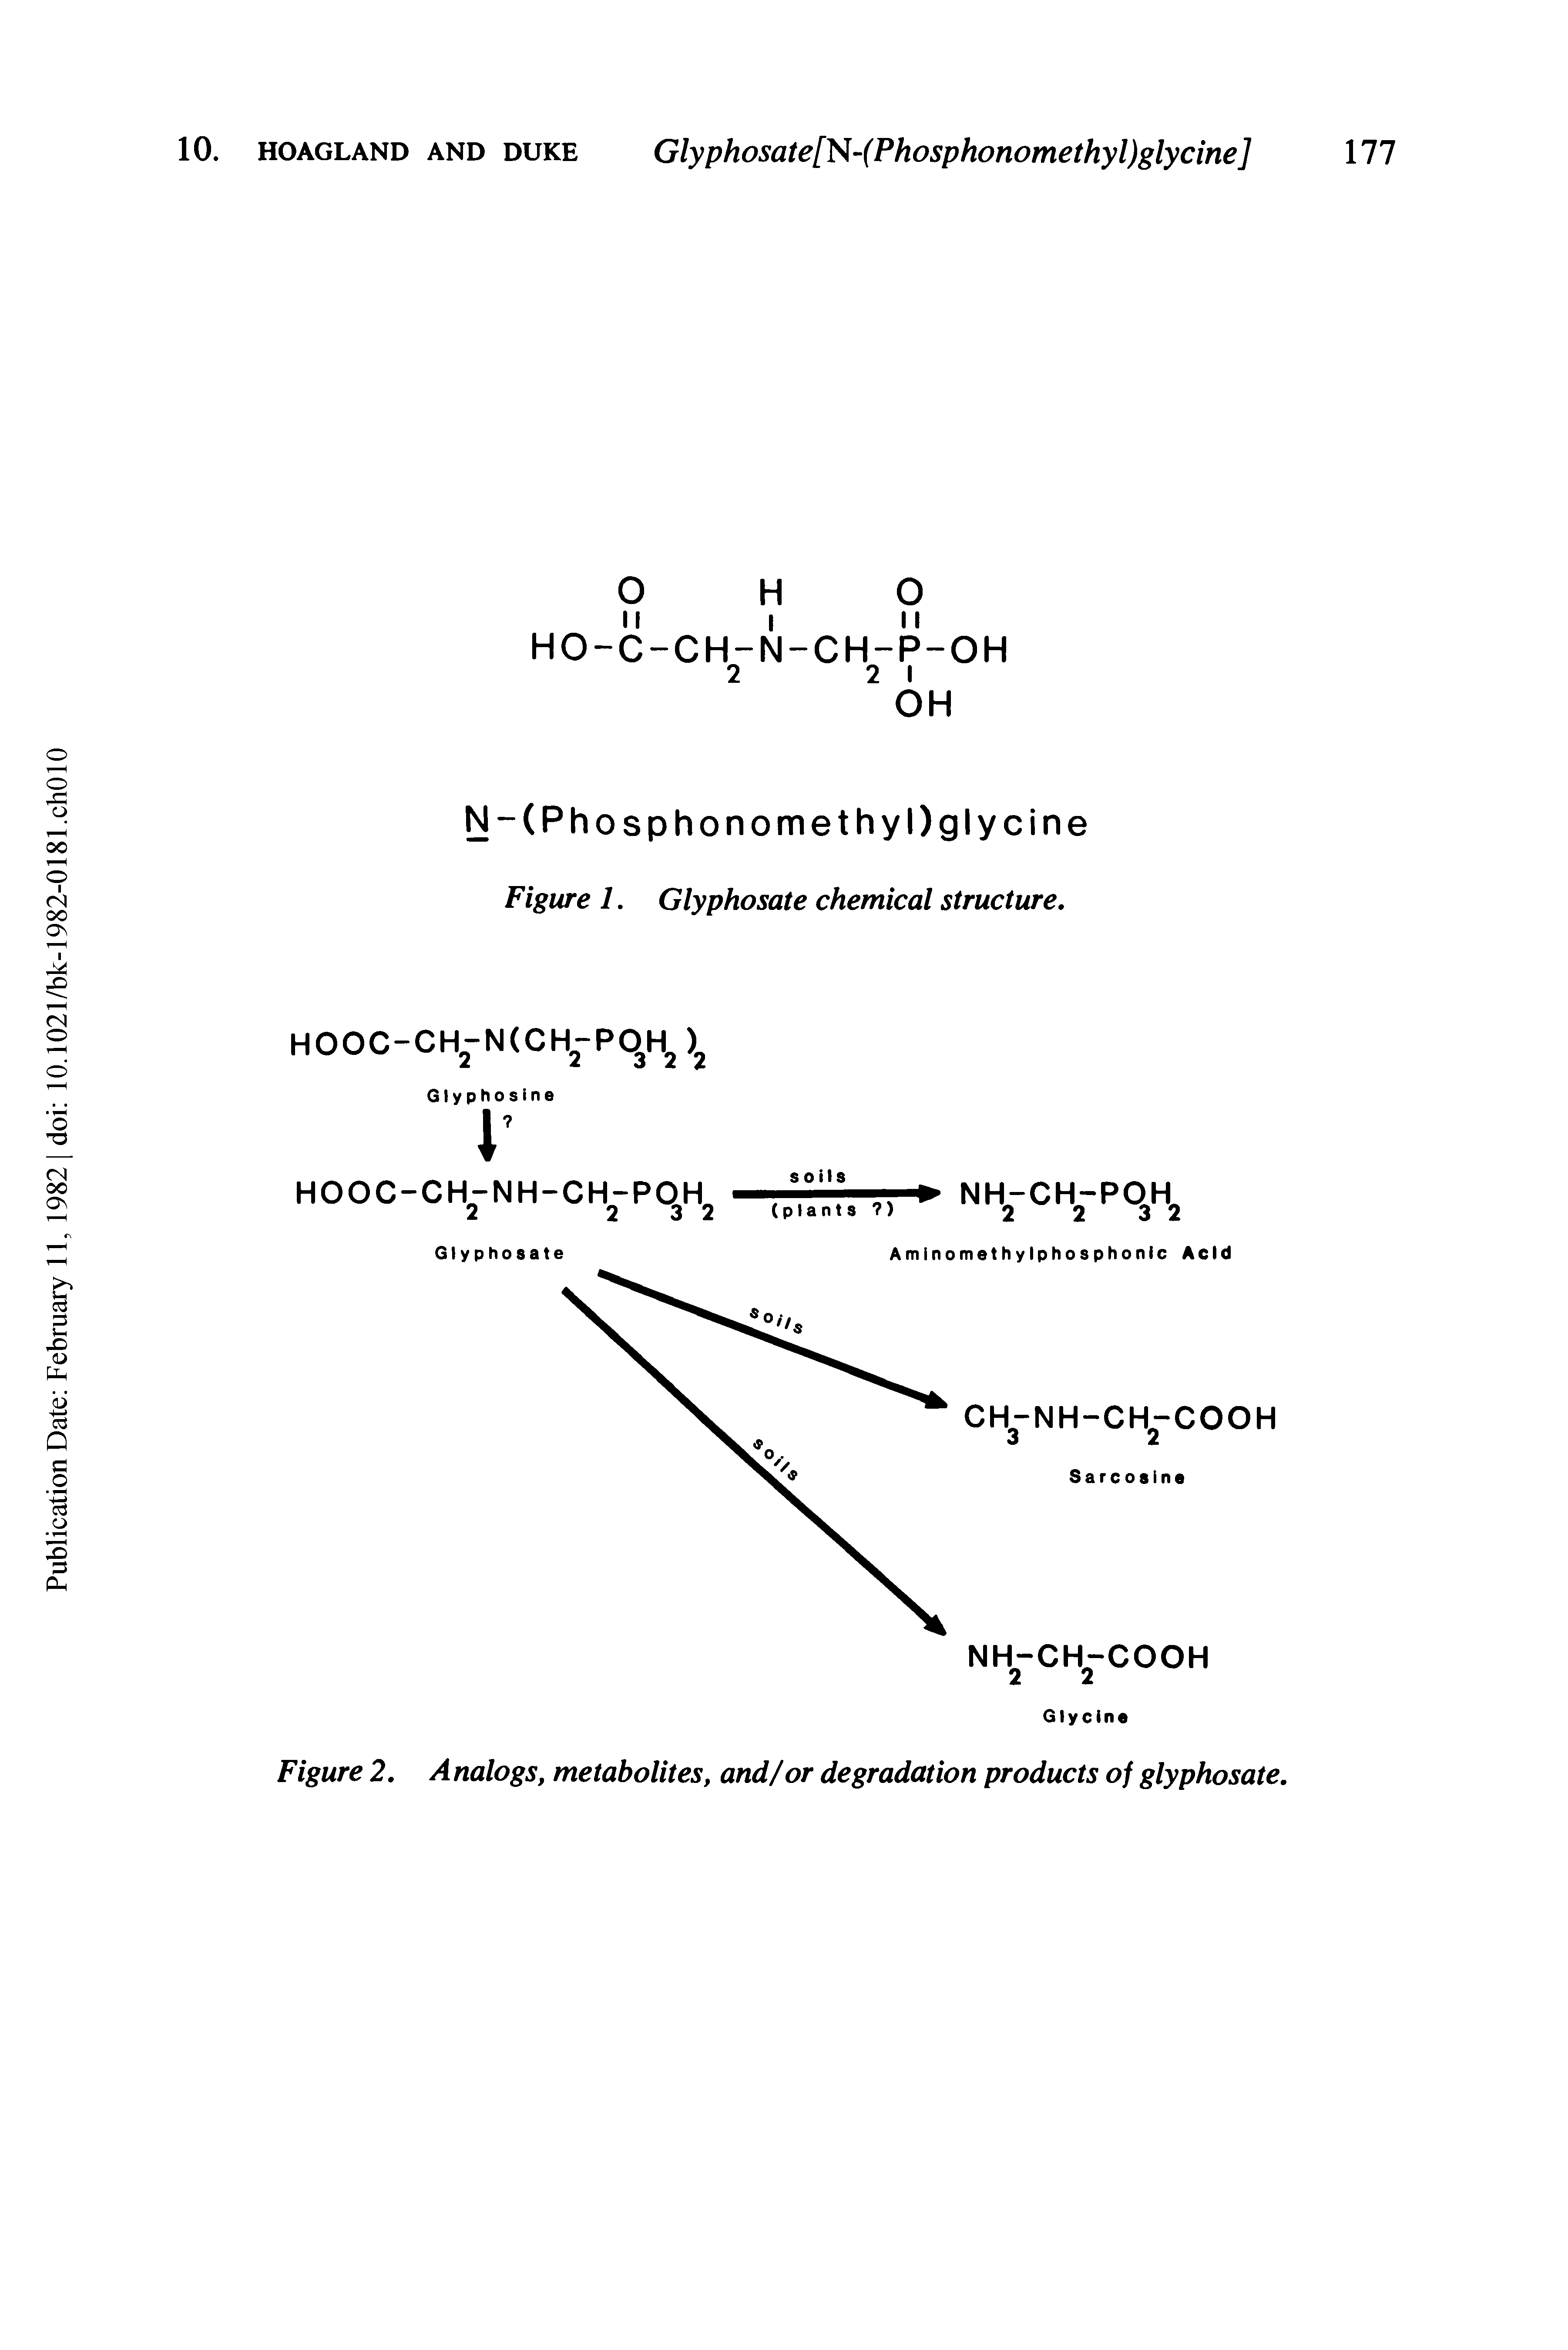 Figure 2, Analogs, metabolites, and/or degradation products of glyphosate.